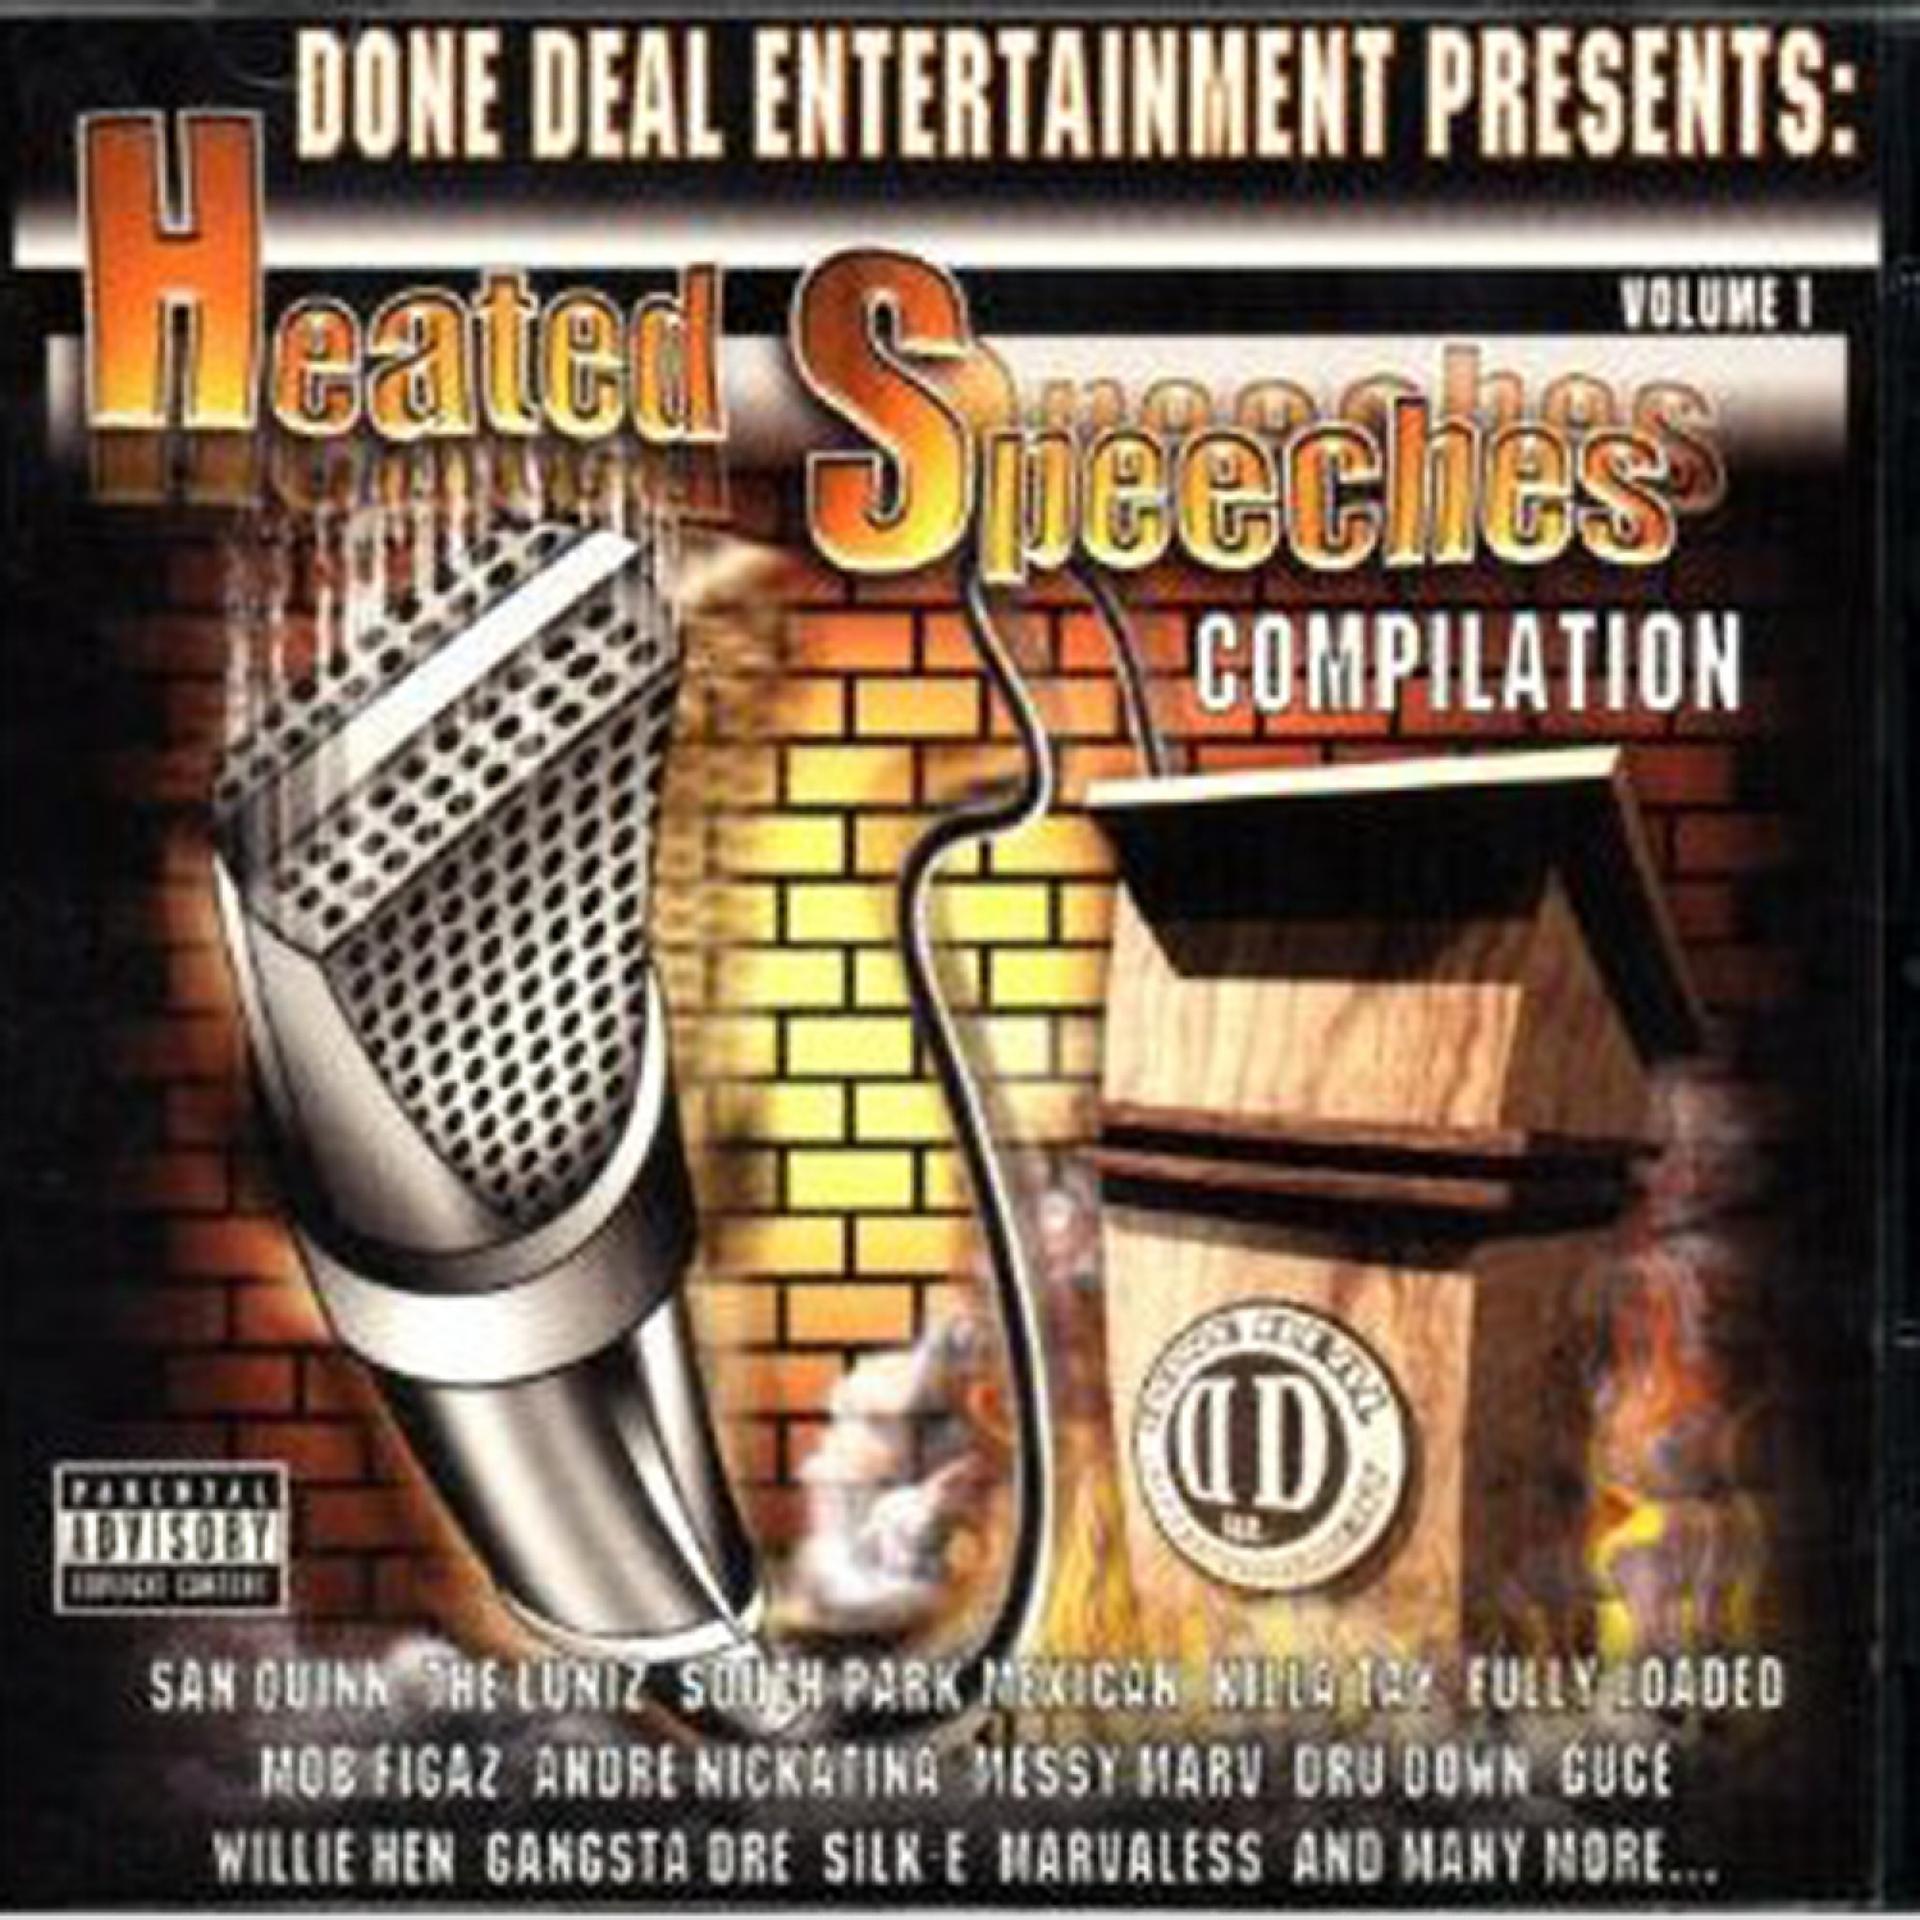 Постер альбома Done Deal Entertainment Presents: Heated Speeches Compilation